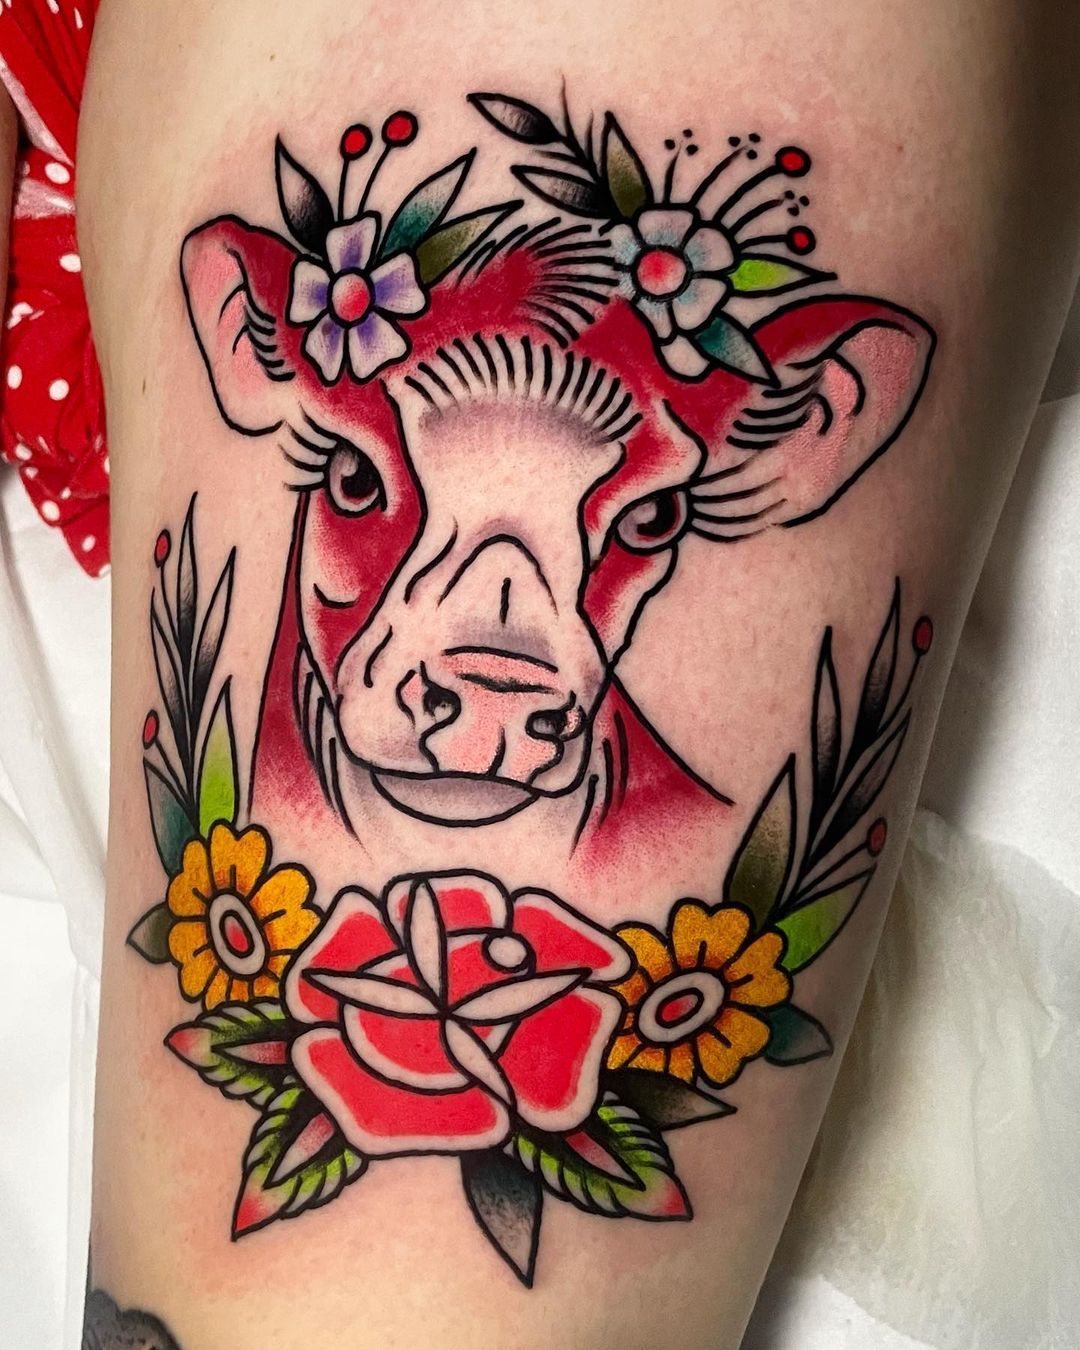 MagnumTattooSupplies on Twitter Danny Taylor did this cute cow tattoo  made using magnumtattoosupplies    oldworkers traditionaltattoo  traditionalartist tradtattoo traditionaltattoo tradtats  traditionalink tradwork oldschooltattoo 